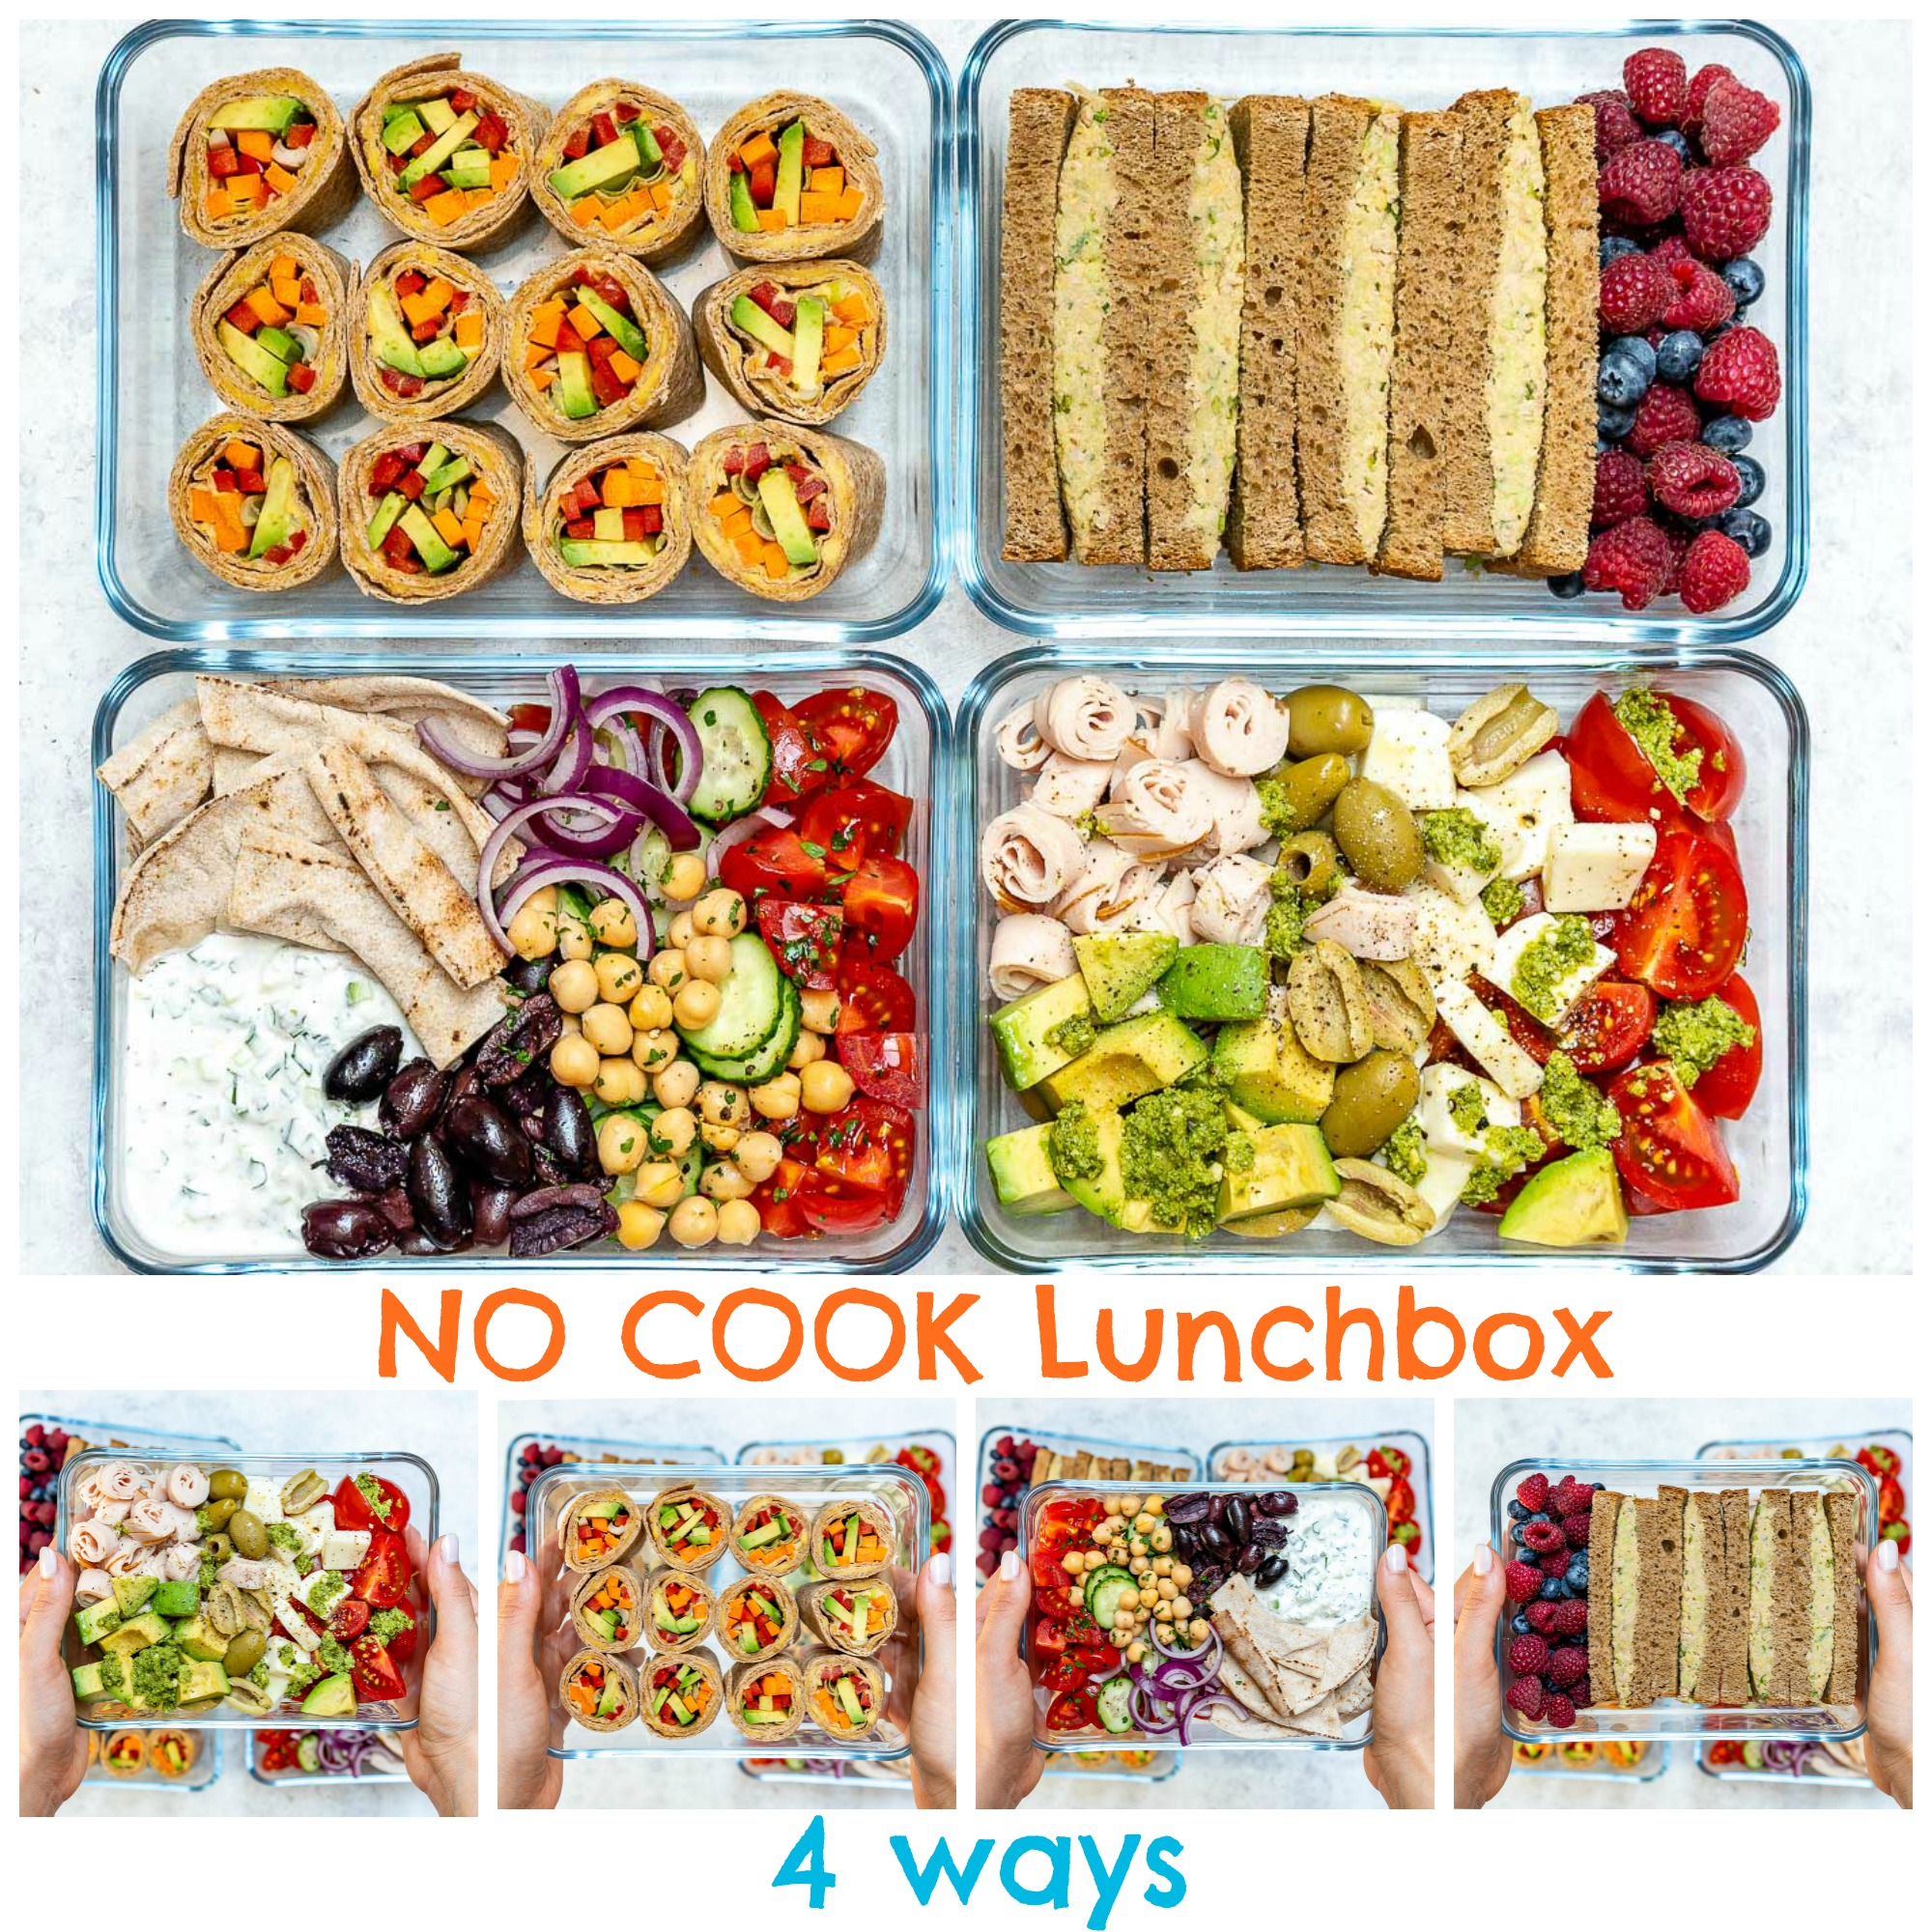 https://cleanfoodcrush.com/wp-content/uploads/2018/09/4-No-Cook-Cold-Lunch-Box-Recipes-by-CleanFoodCrush-.jpg